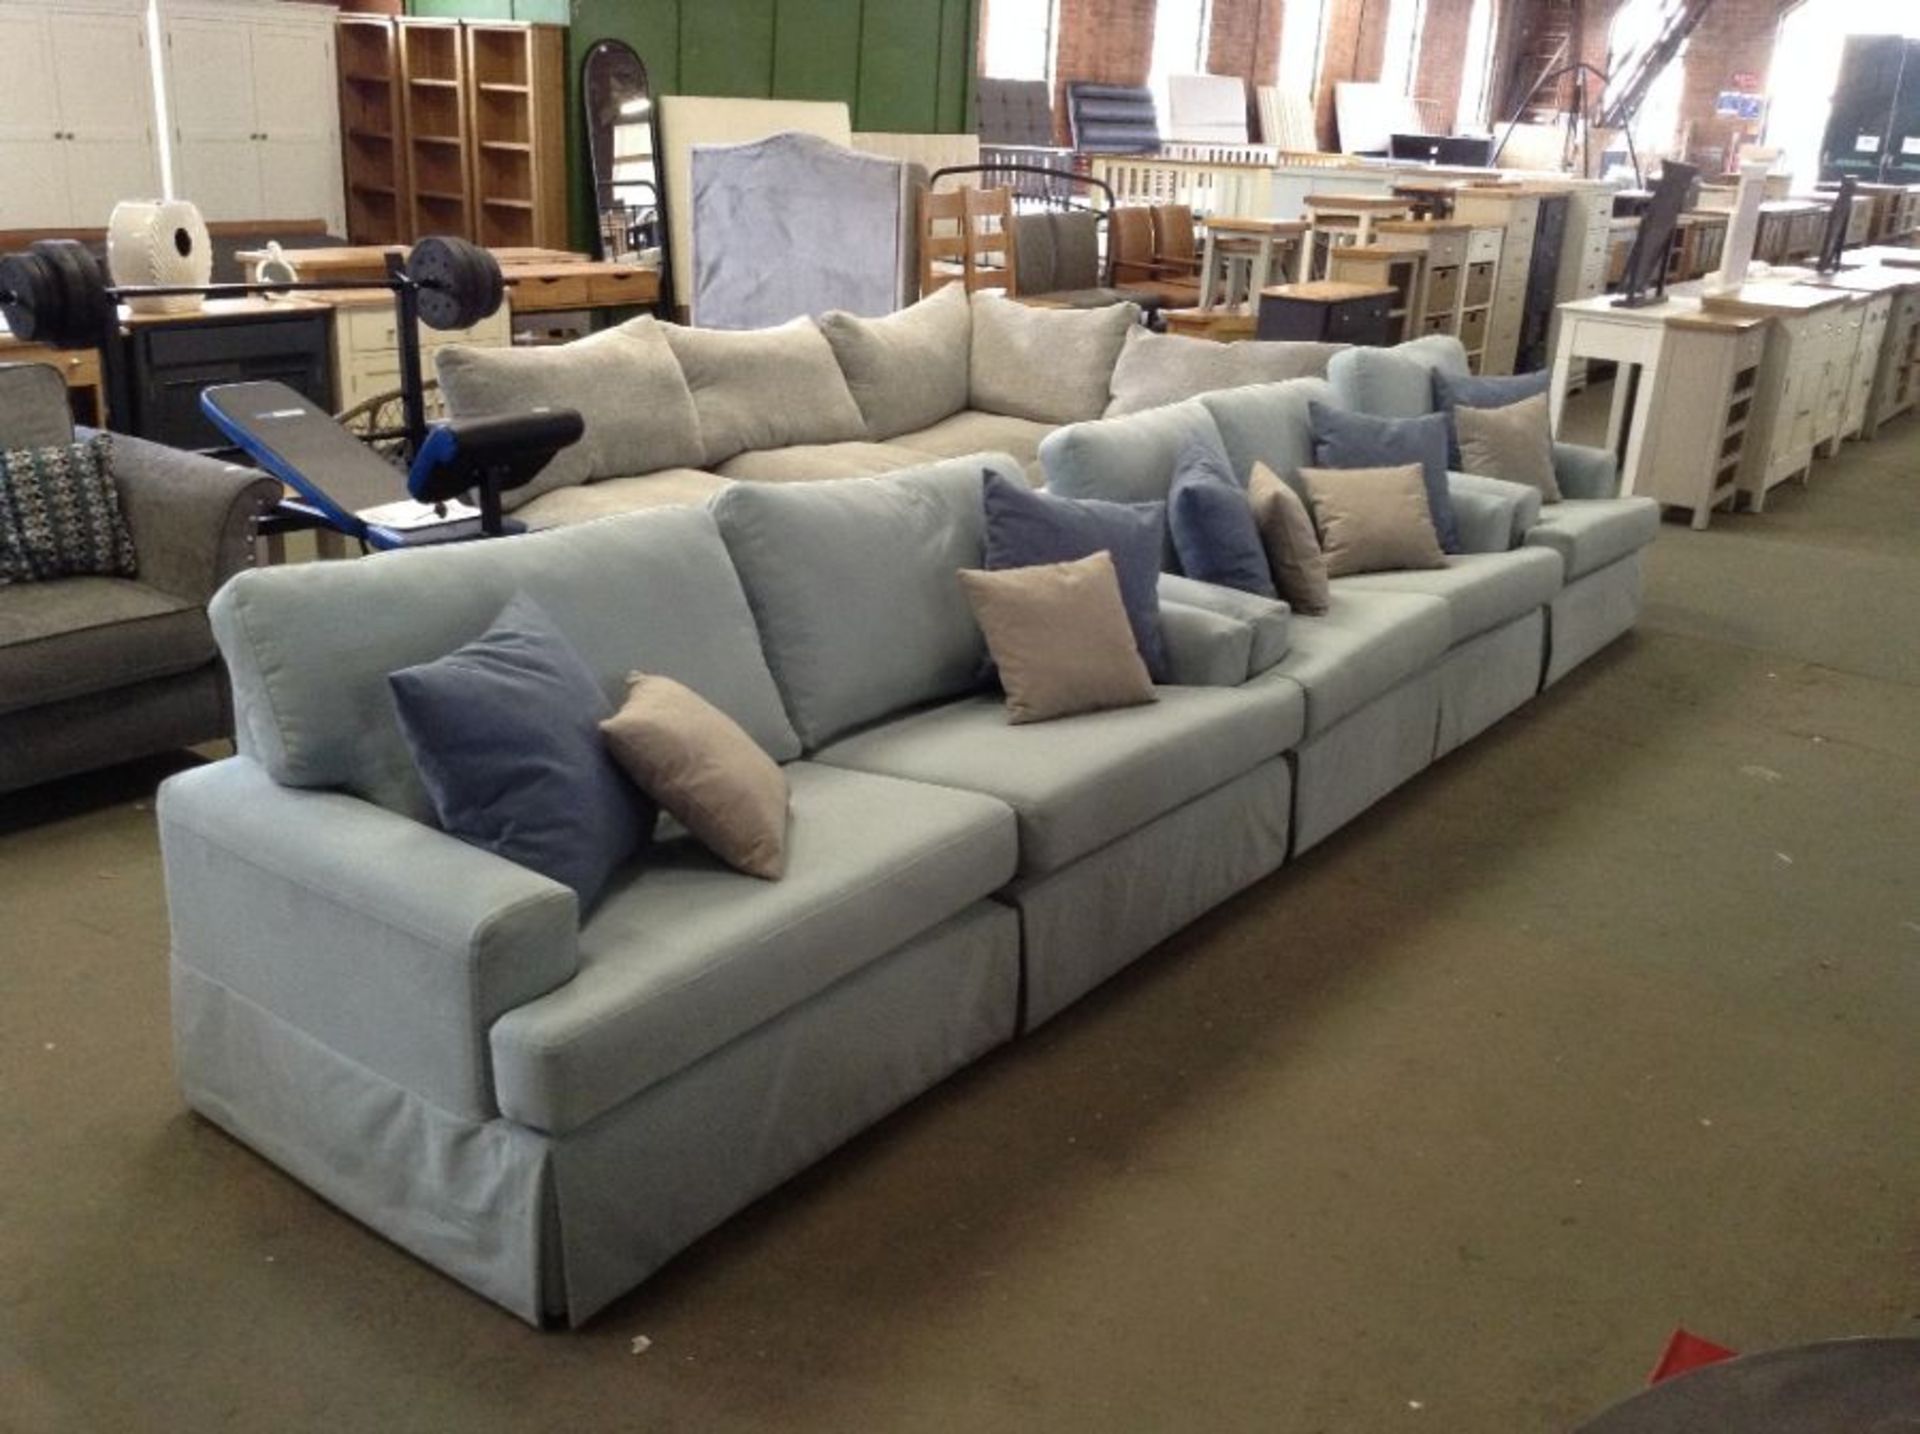 LIGHT BLUE SPLIT 4 SEATER 2 SEATER AND CHAIR